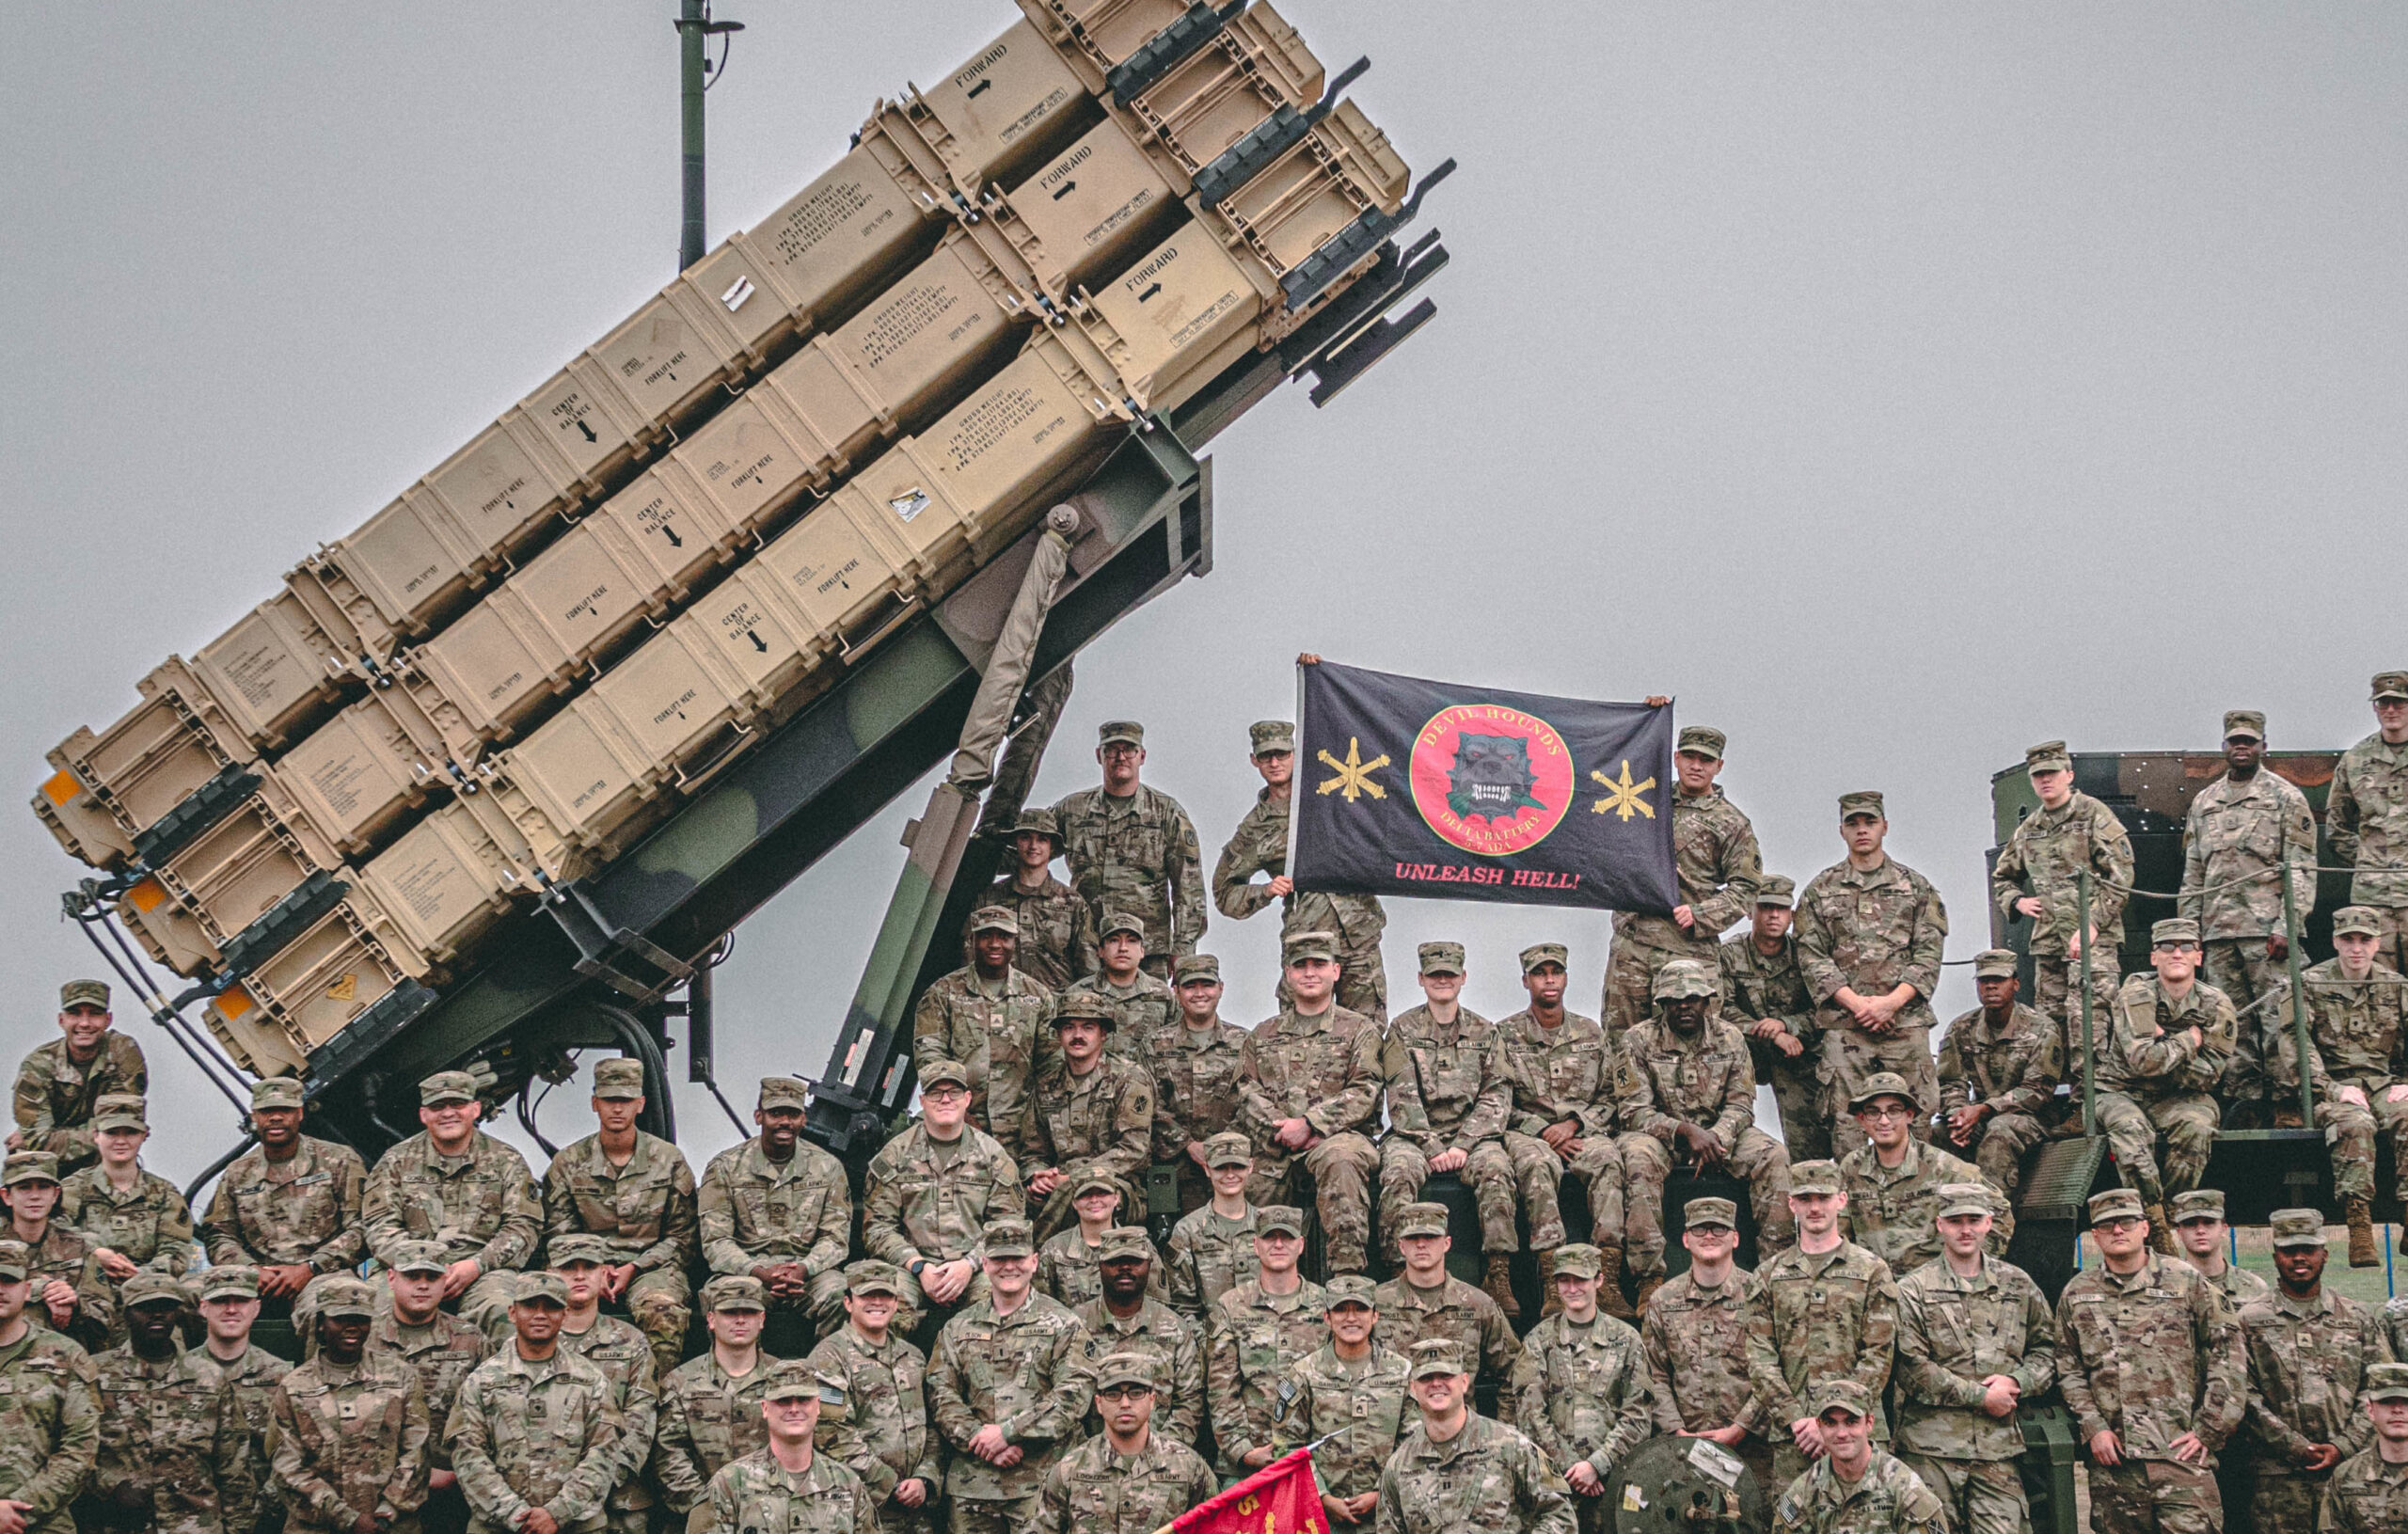 Army will add 17 air defense units while cutting 24,000 active duty spots